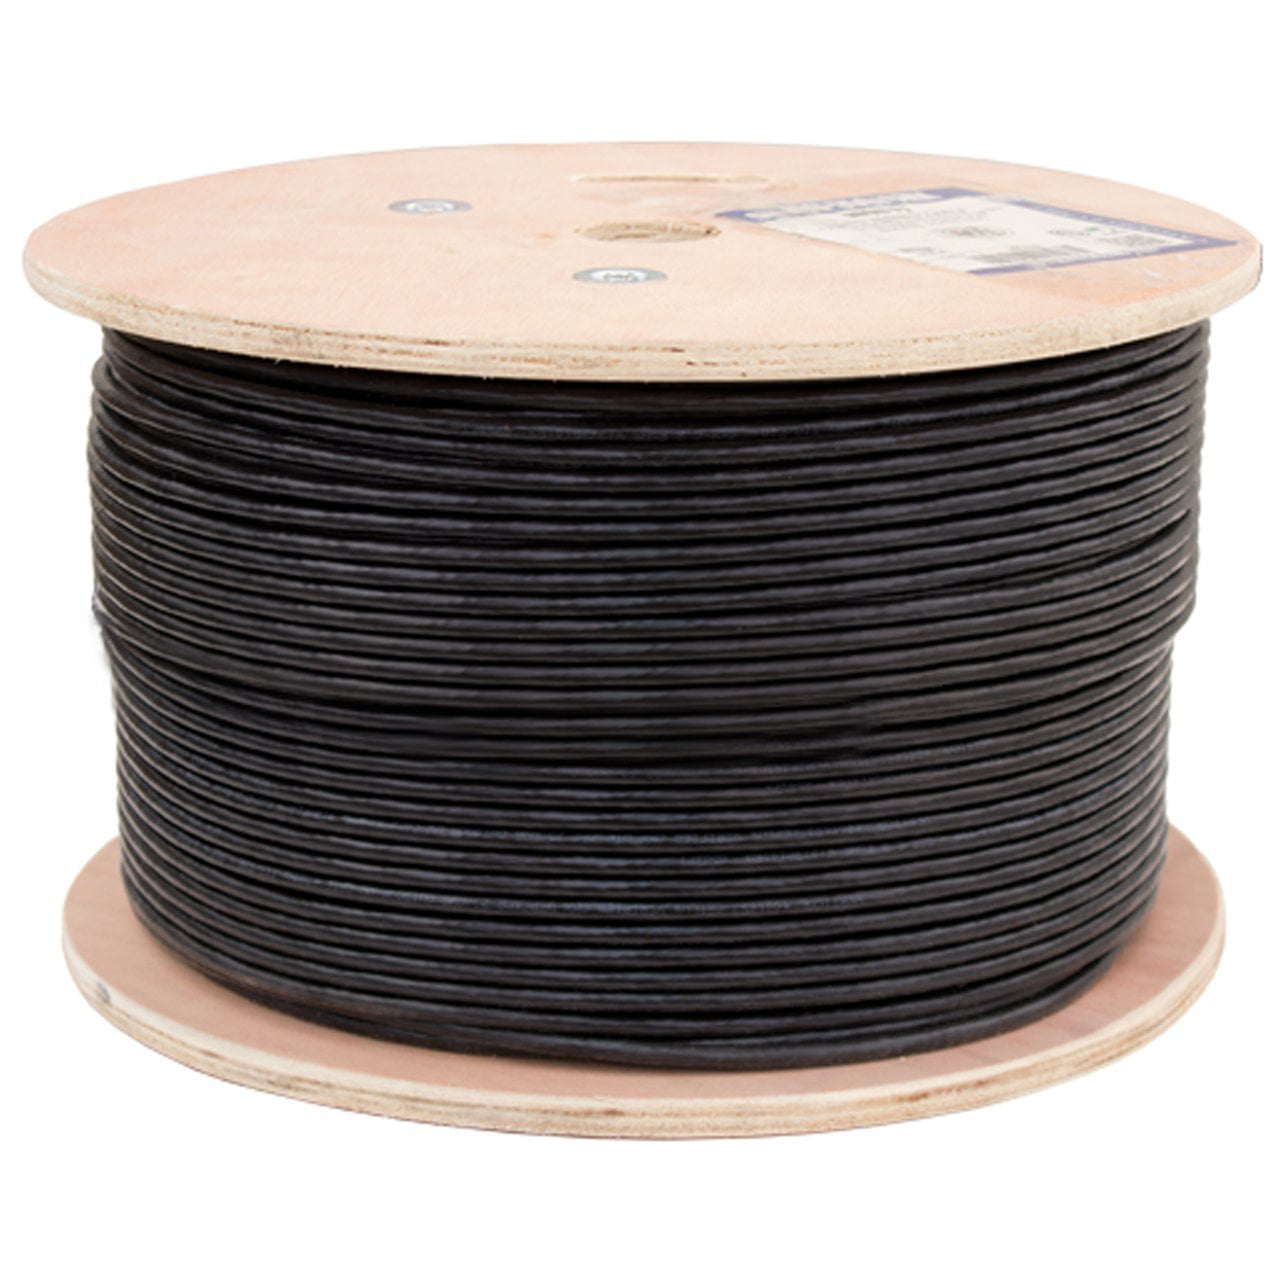 23AWG Solid Bare Copper ETL Listed Cat6 Outdoor trueCABLE Shielded FTP Bulk Ethernet Cable Direct Burial Rated CMX Waterproof 550MHz 1000ft 